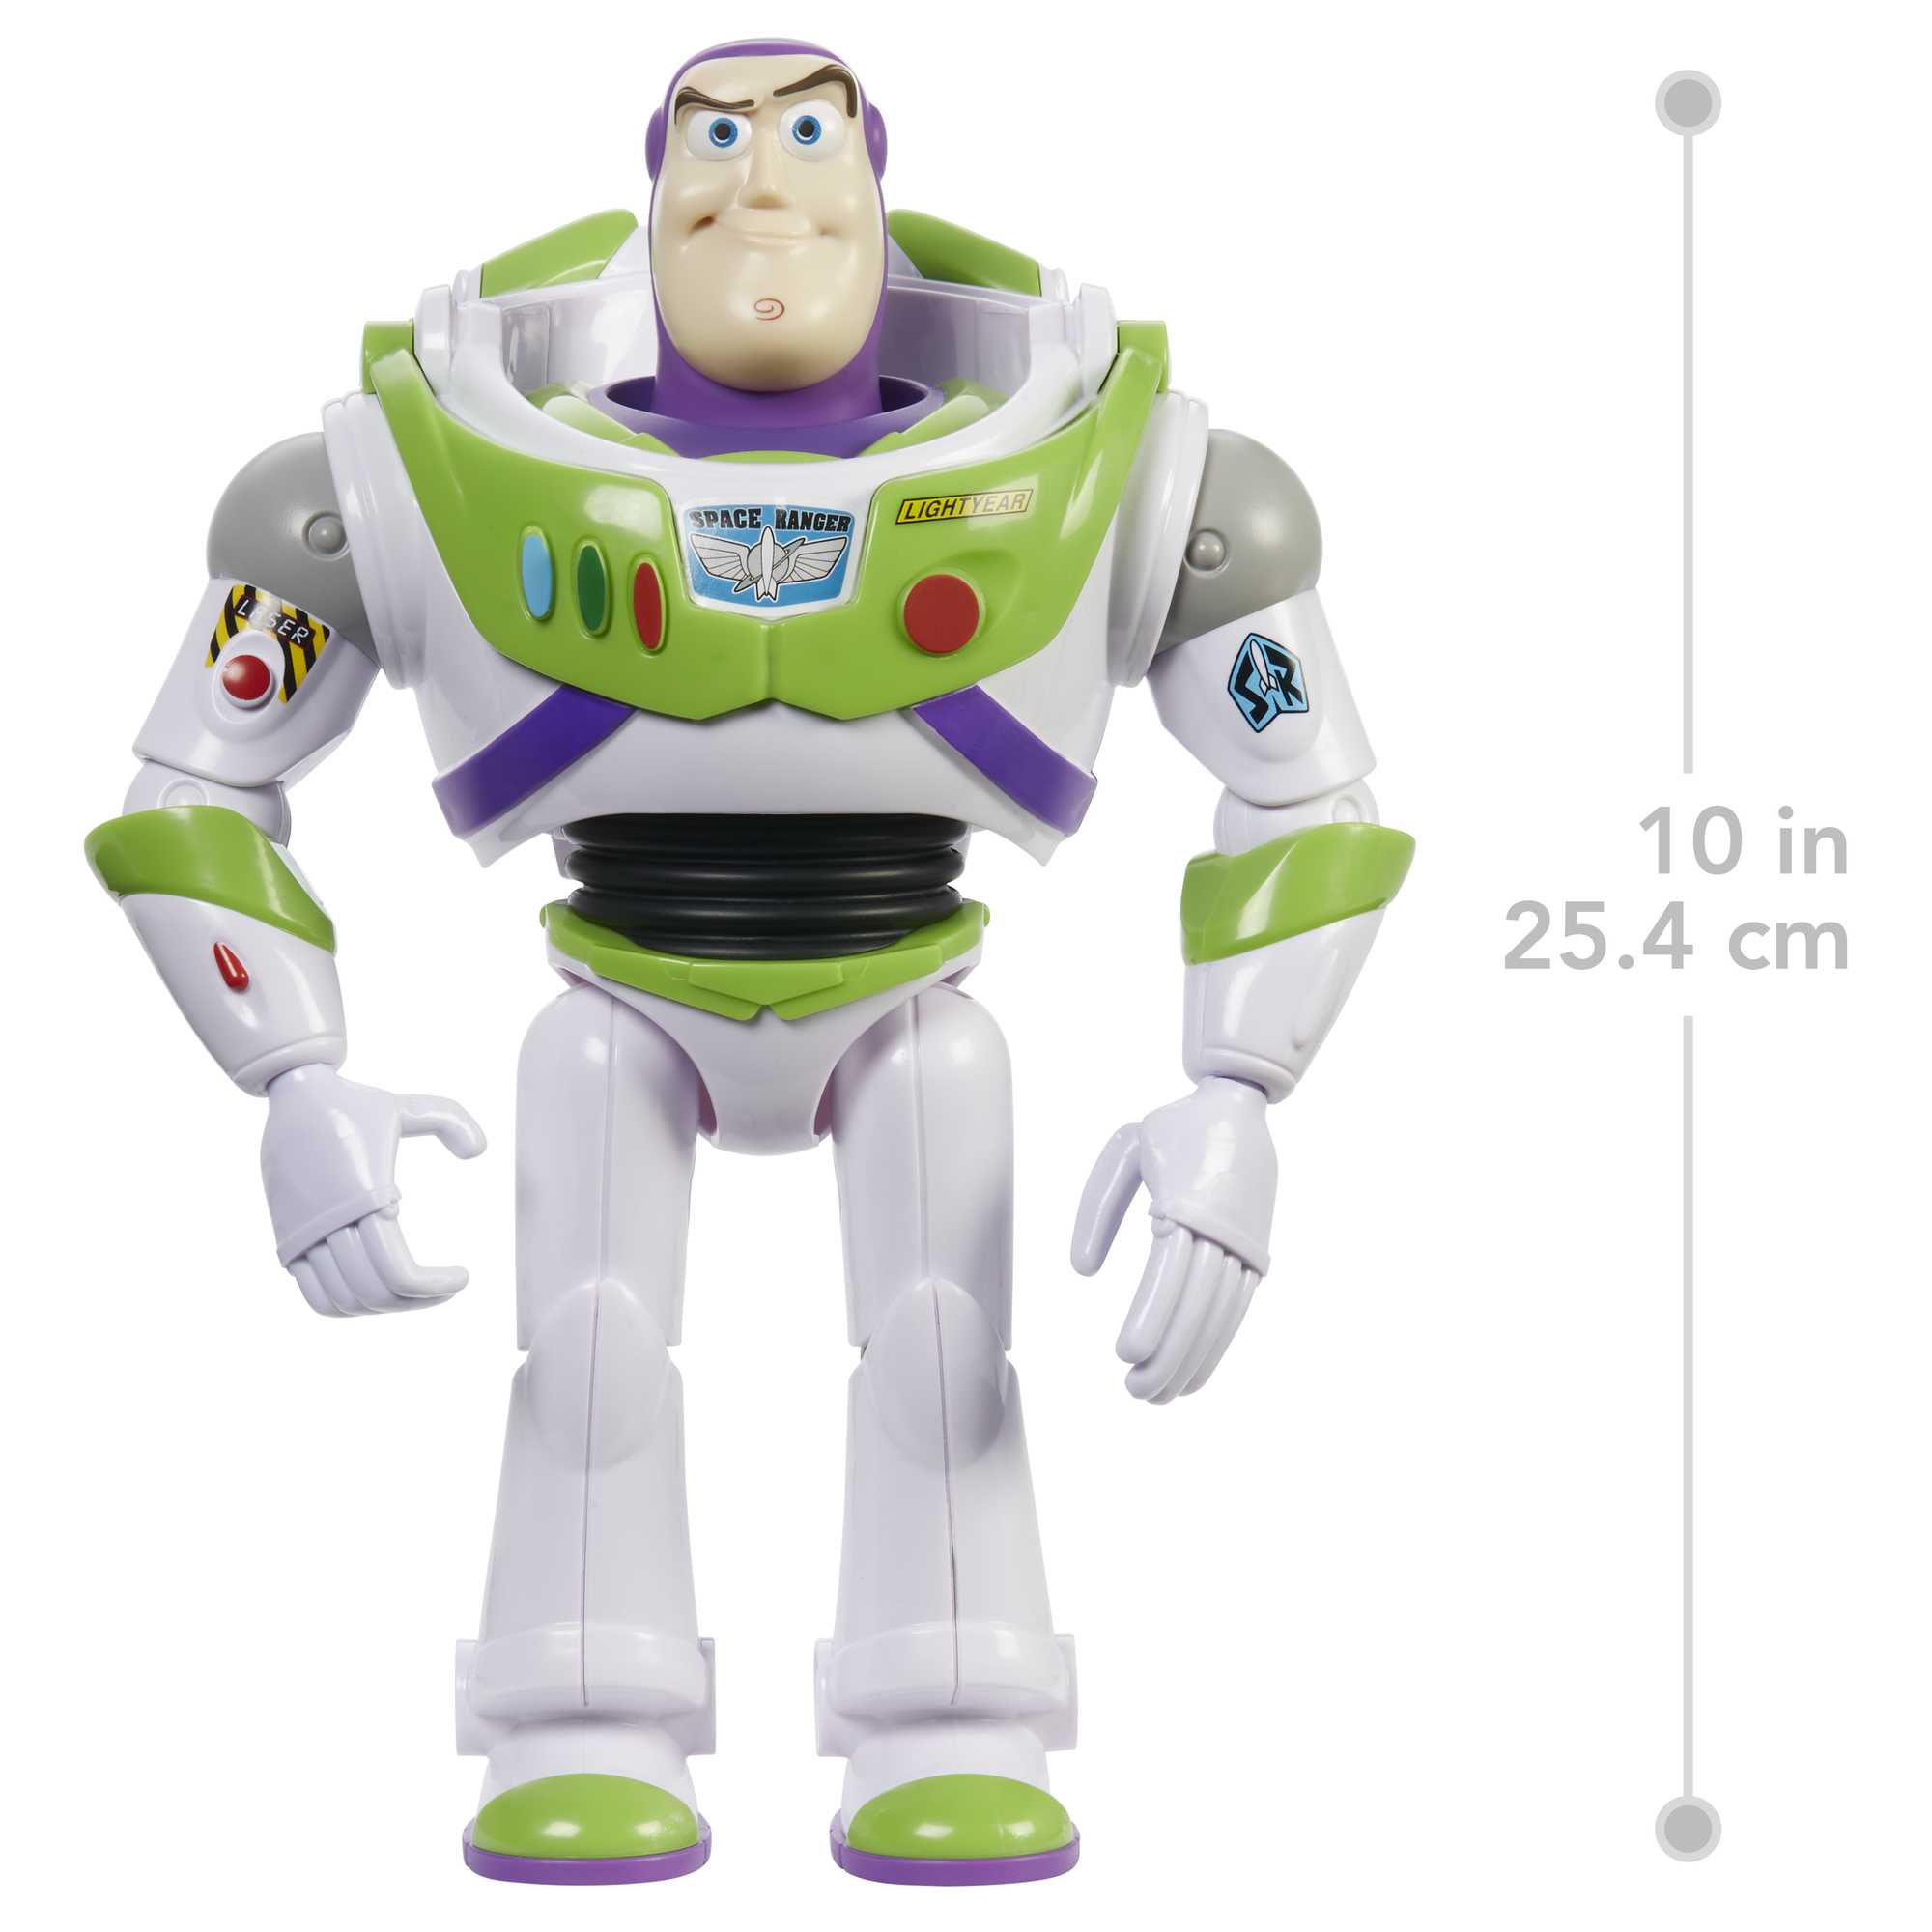 Vintage Toy Story Movie Andy and Buzz Light-year Bonnie Plush 